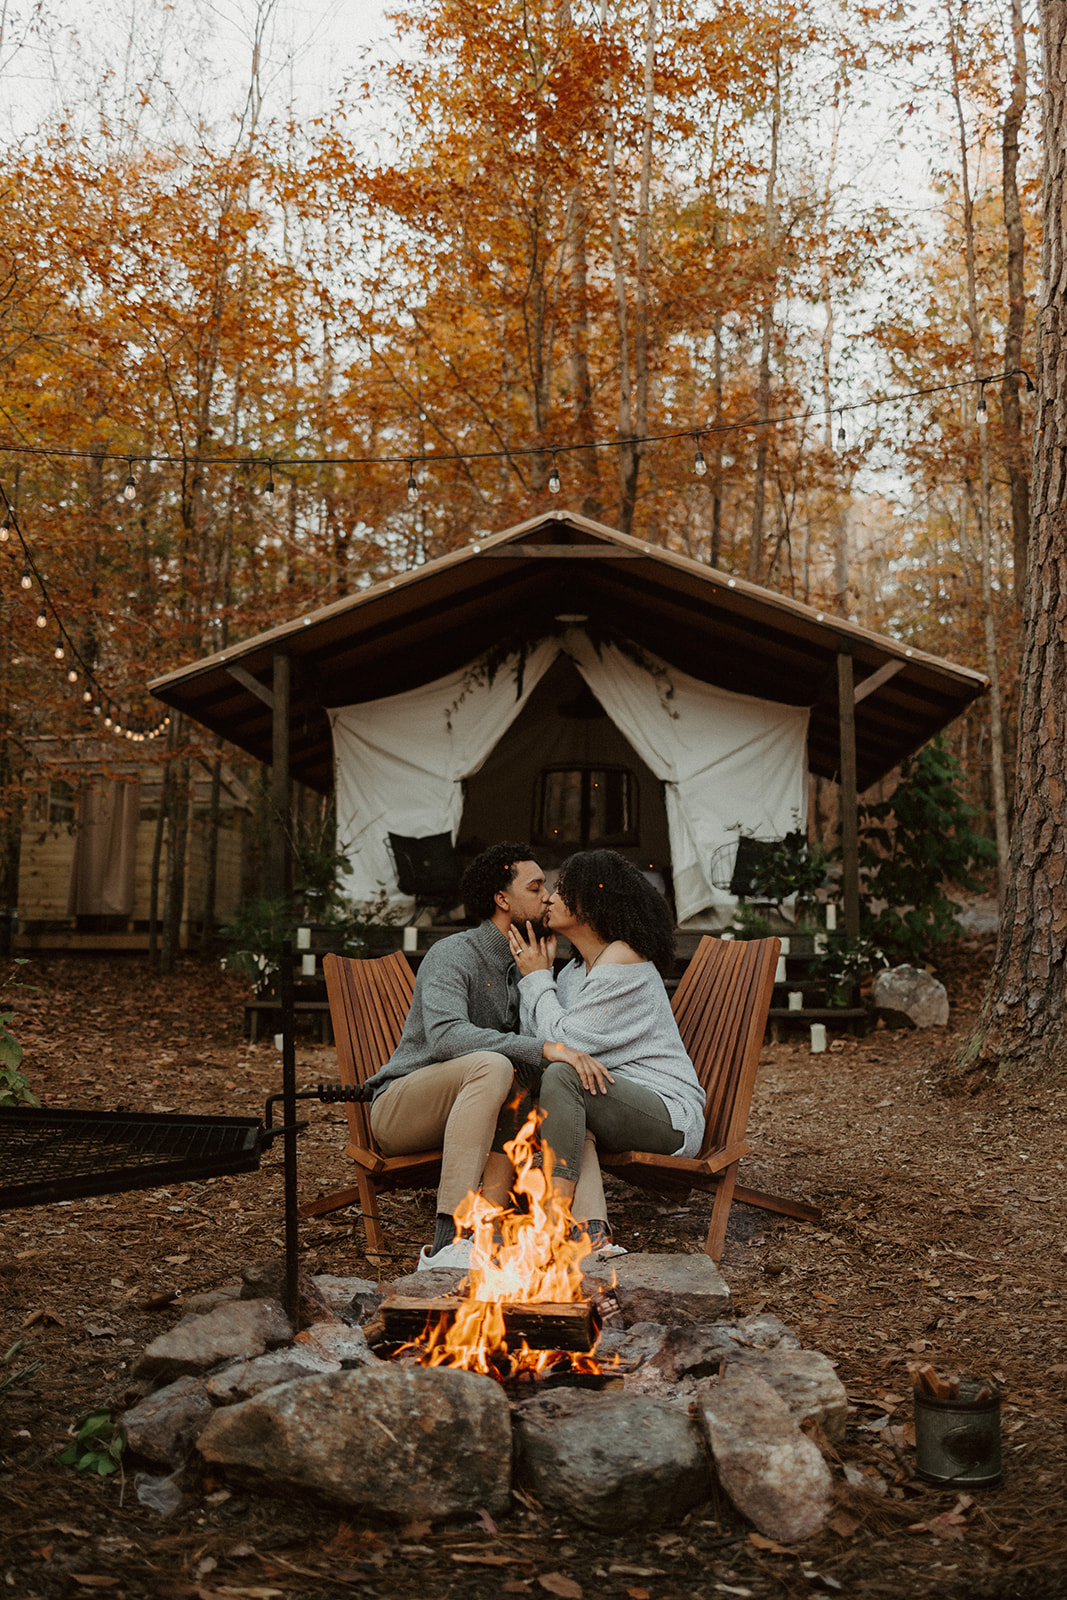 the couple kissing in front of the campfire